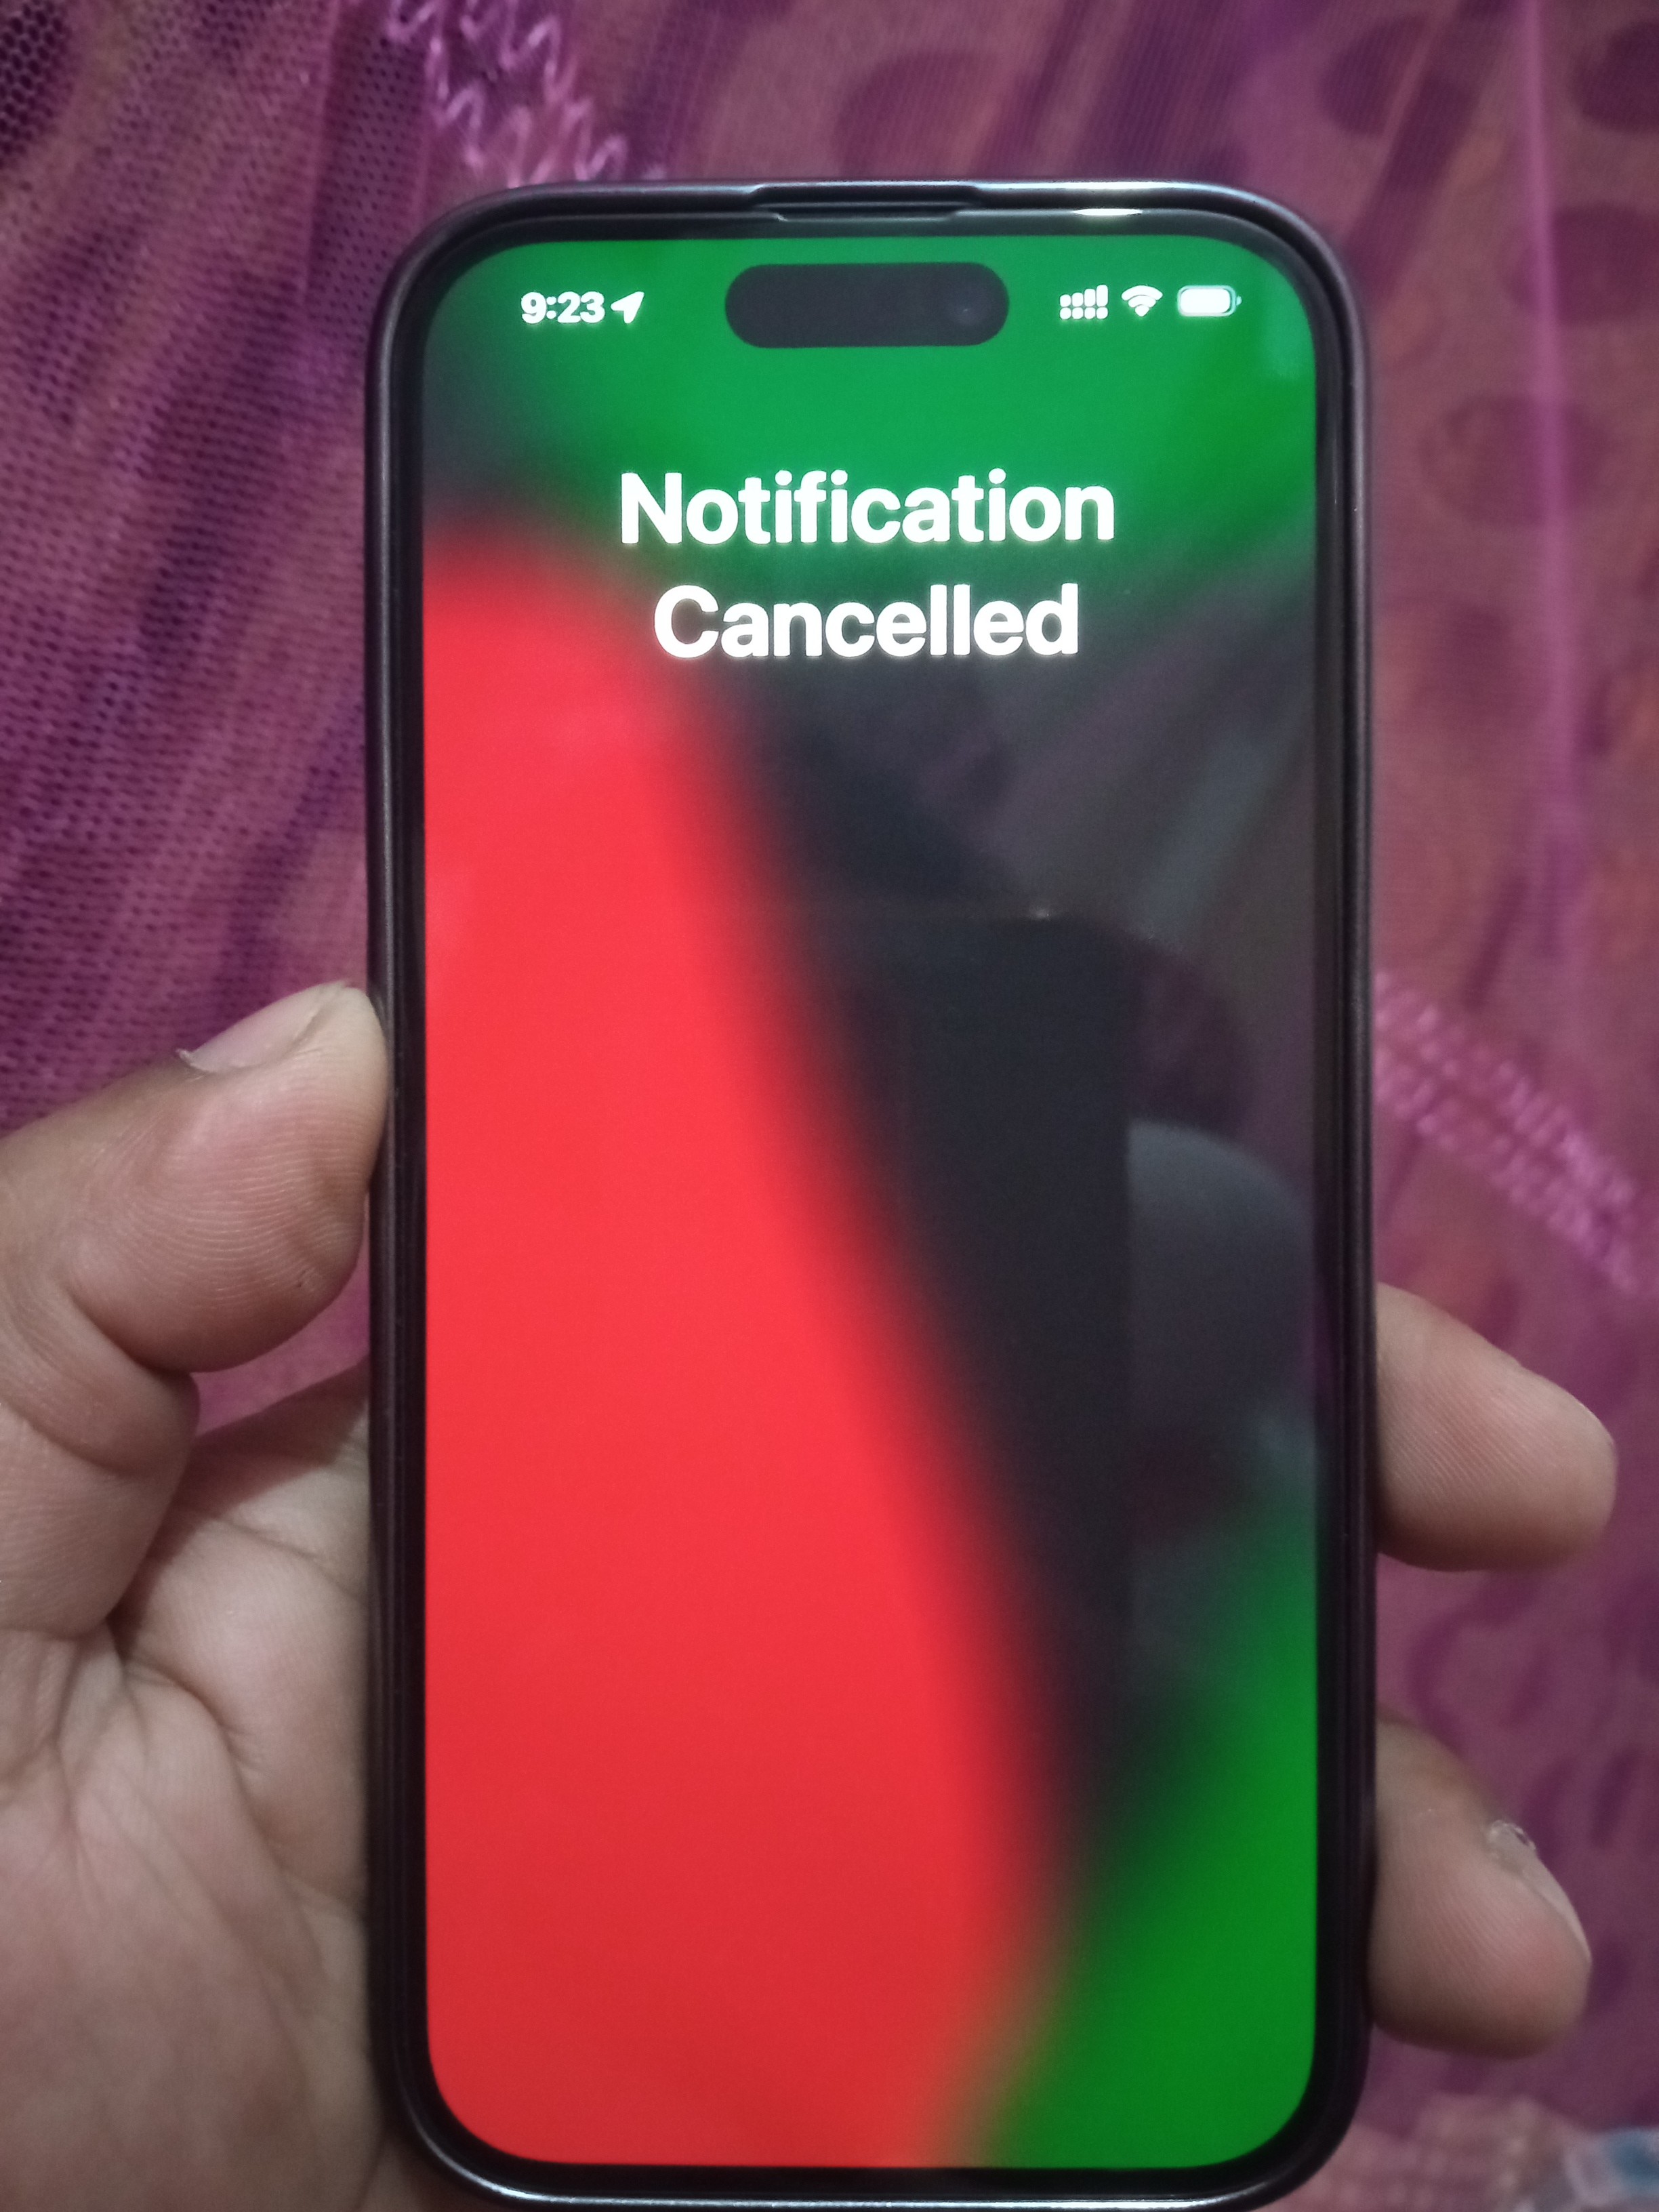 What in notifying cancelled show my phone… - Apple Community